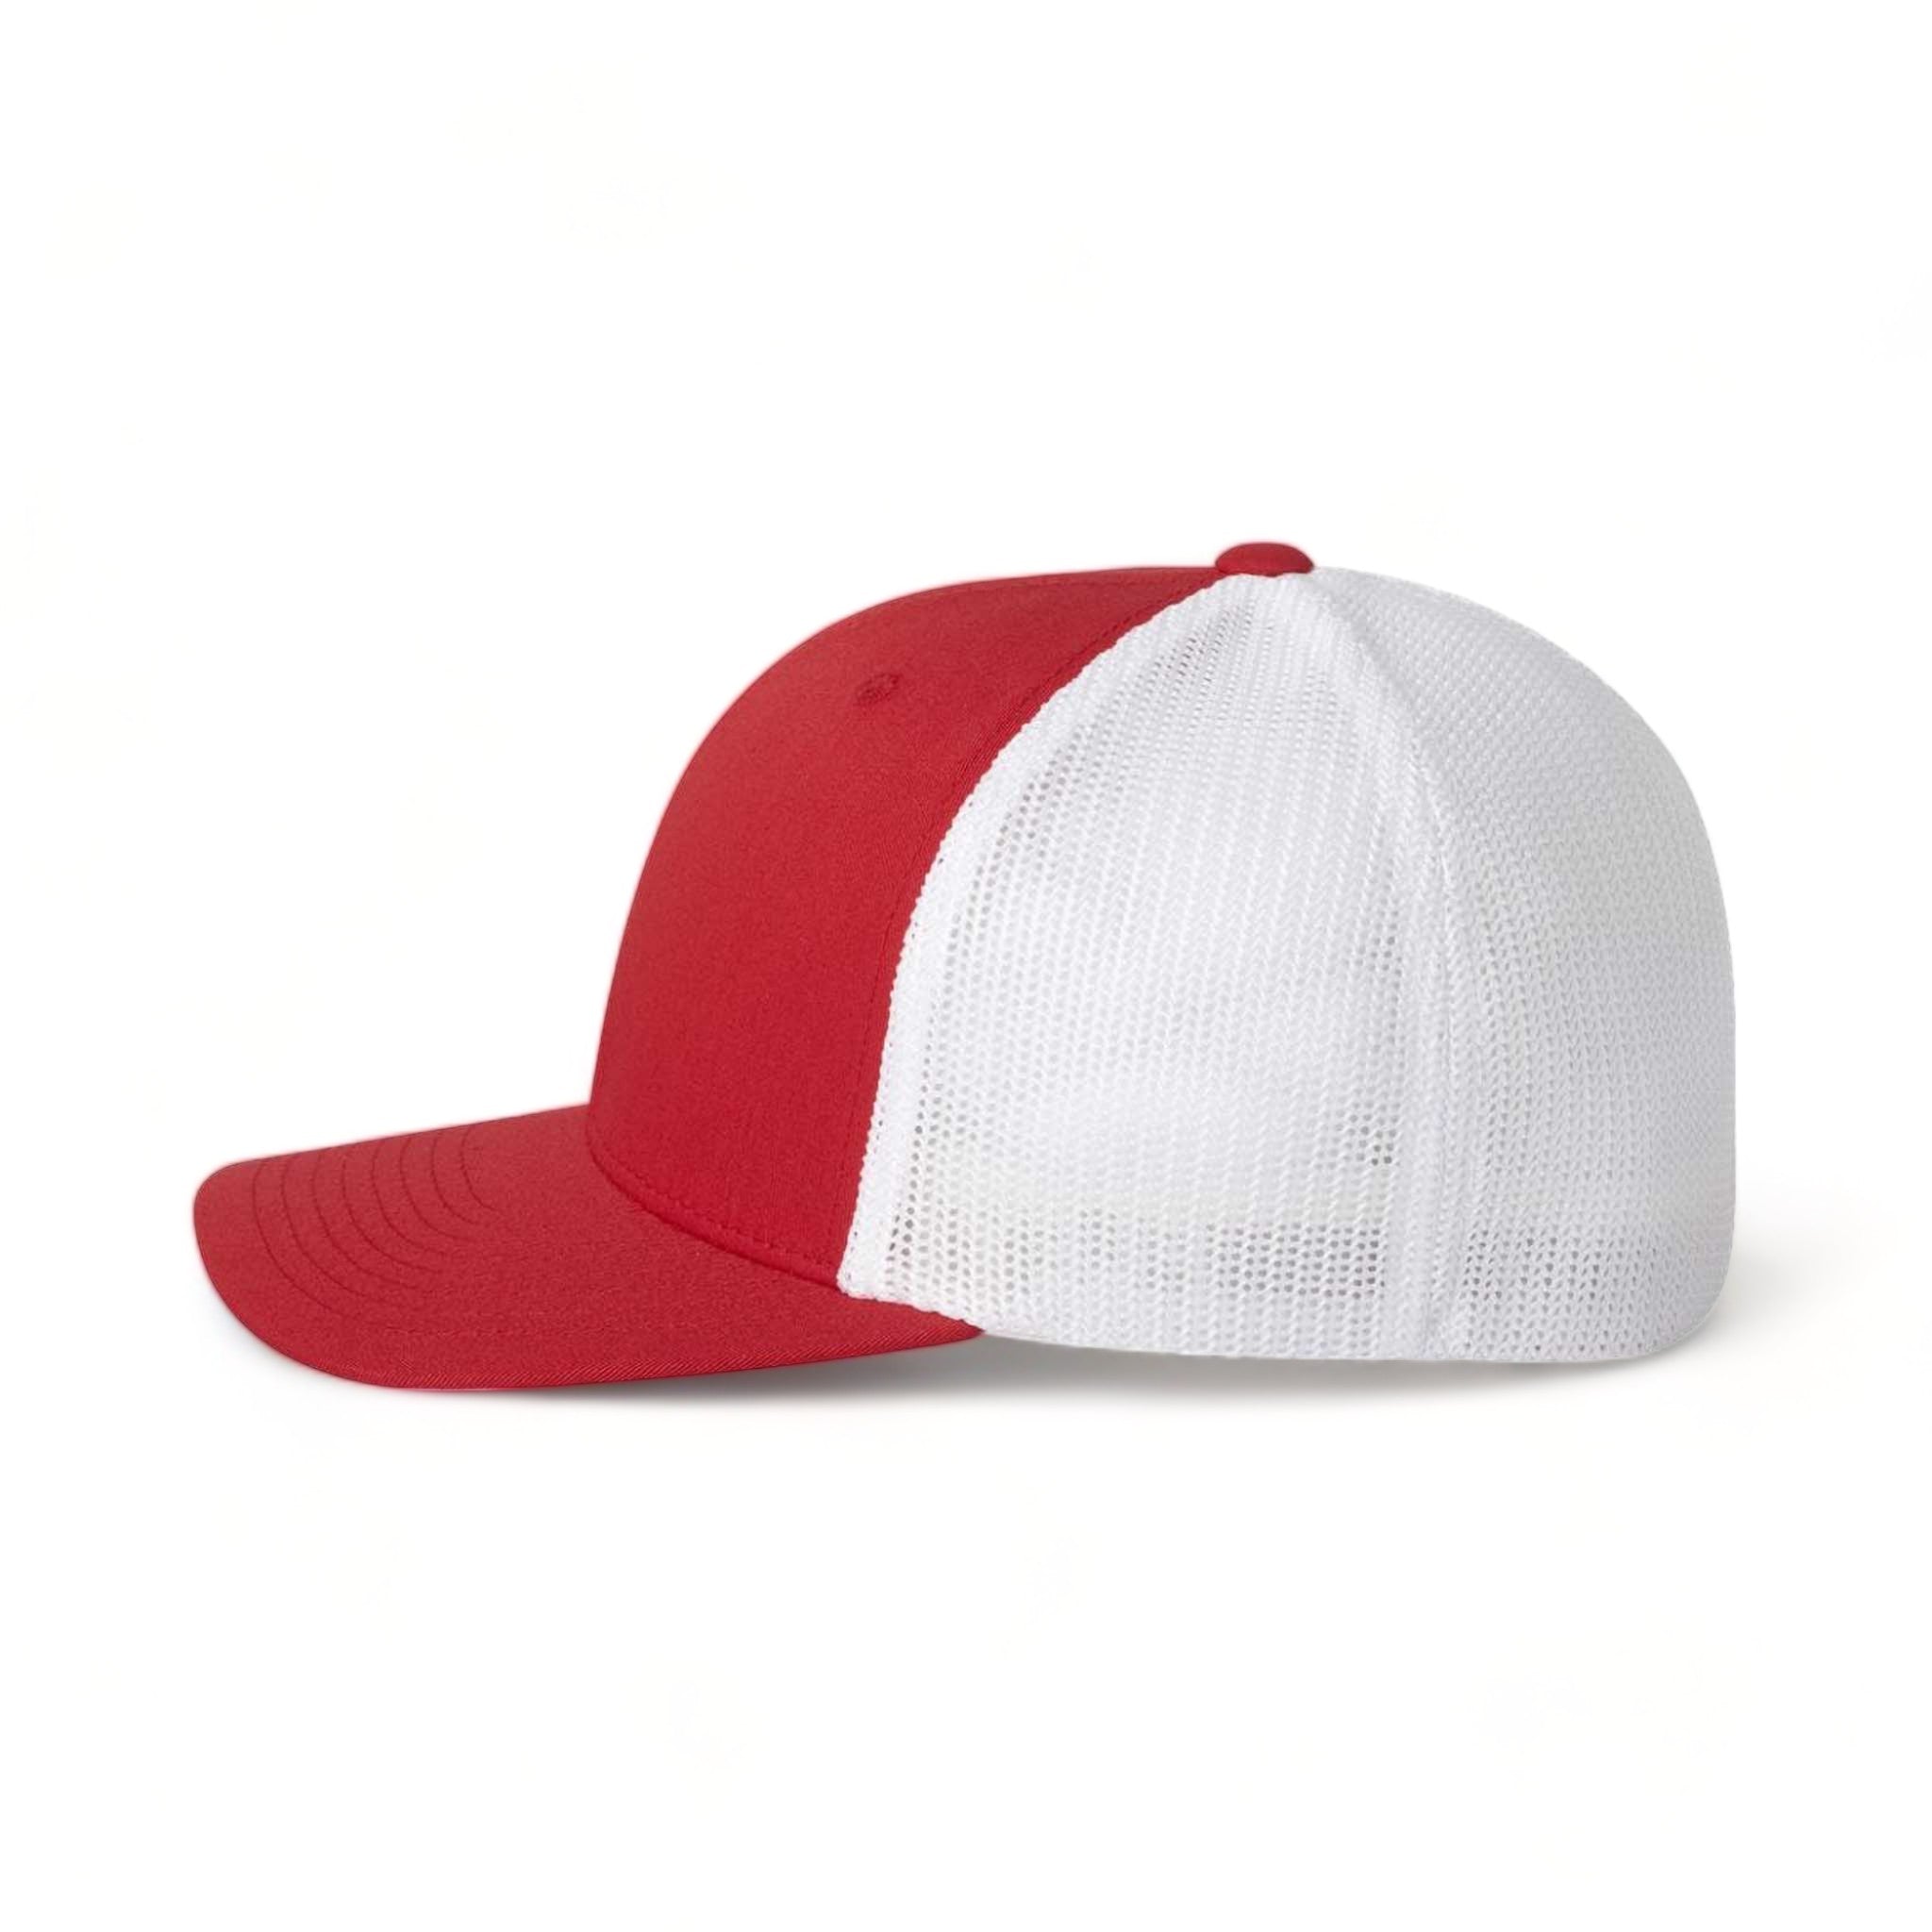 Side view of Flexfit 6511 custom hat in red and white